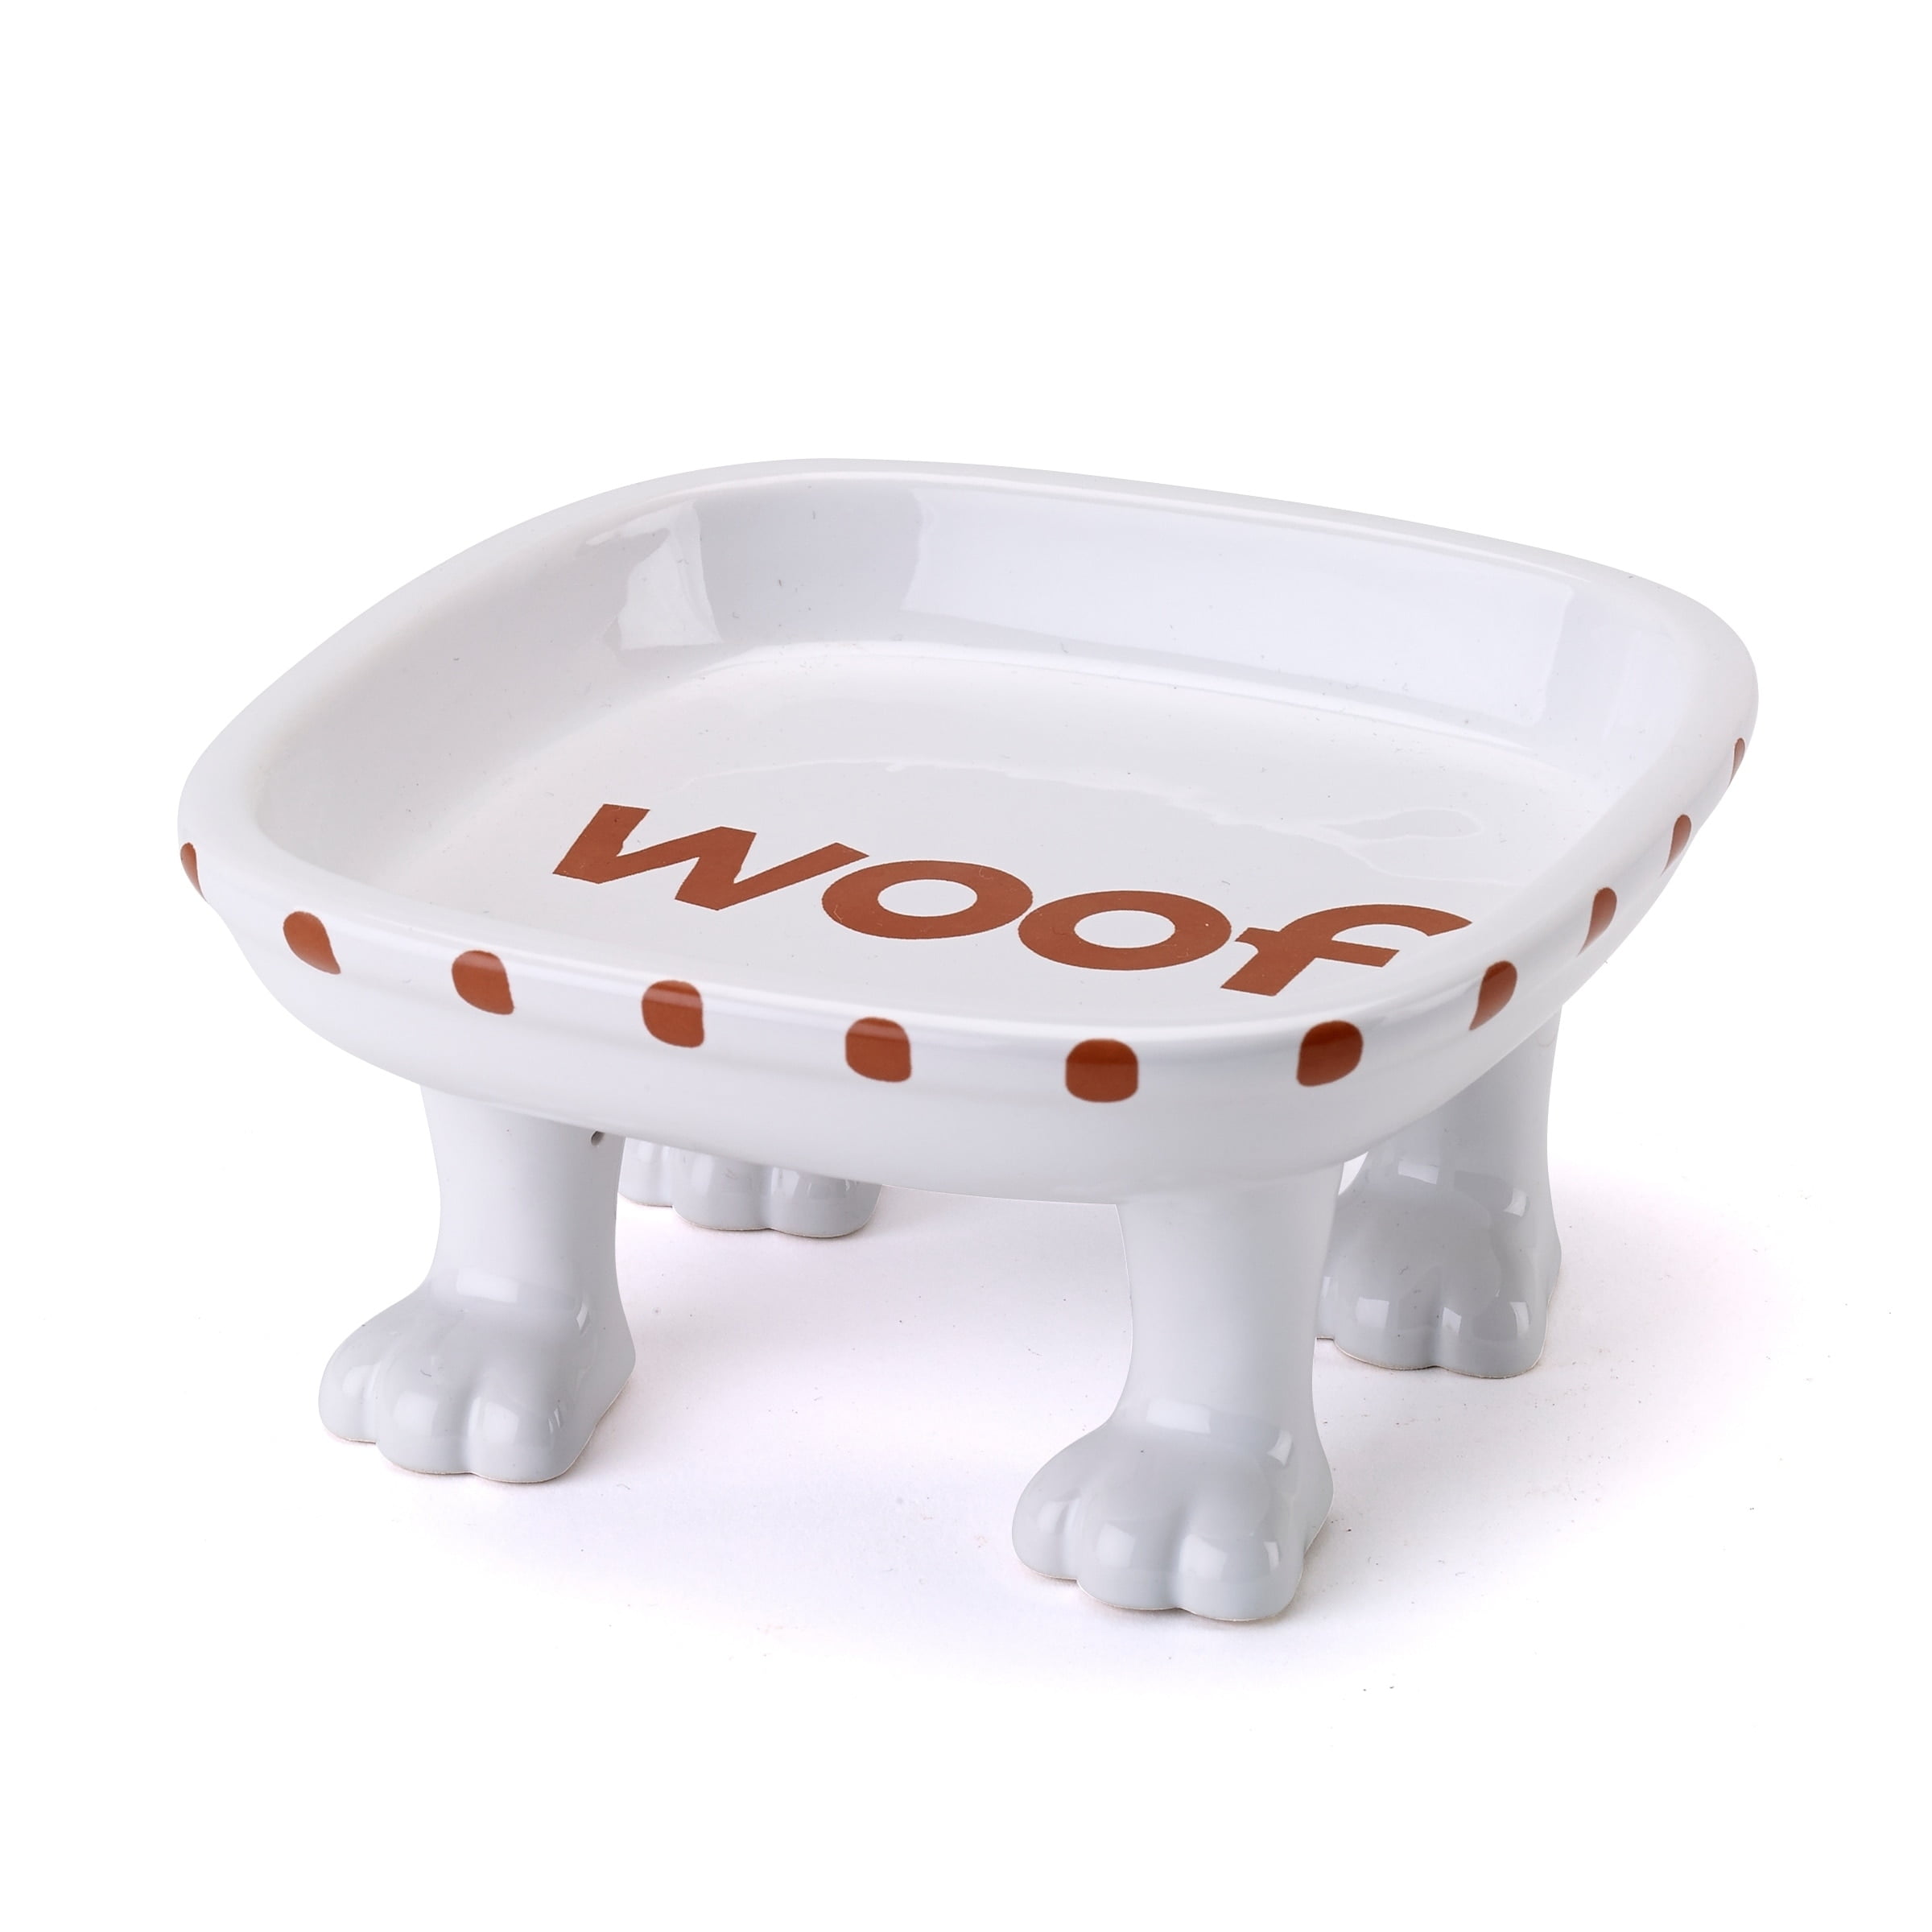 Dog Parade Soap Dish Made By Jenny And Jeff Designs 5 3/4" X 5" #CA00781 NEW 